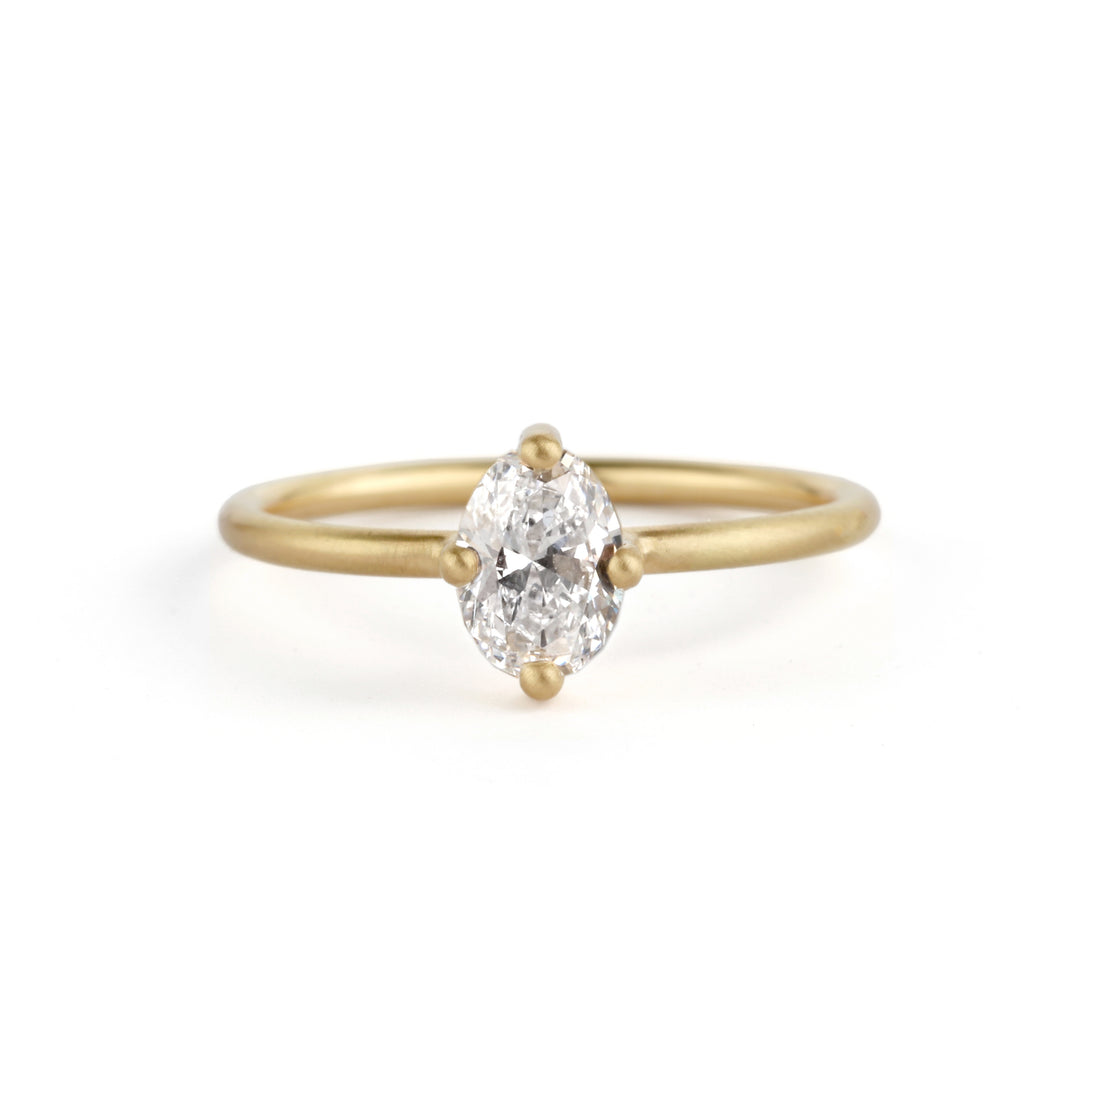  Diamond Oval Solo Ring by Shimell & Madden | The Cut London